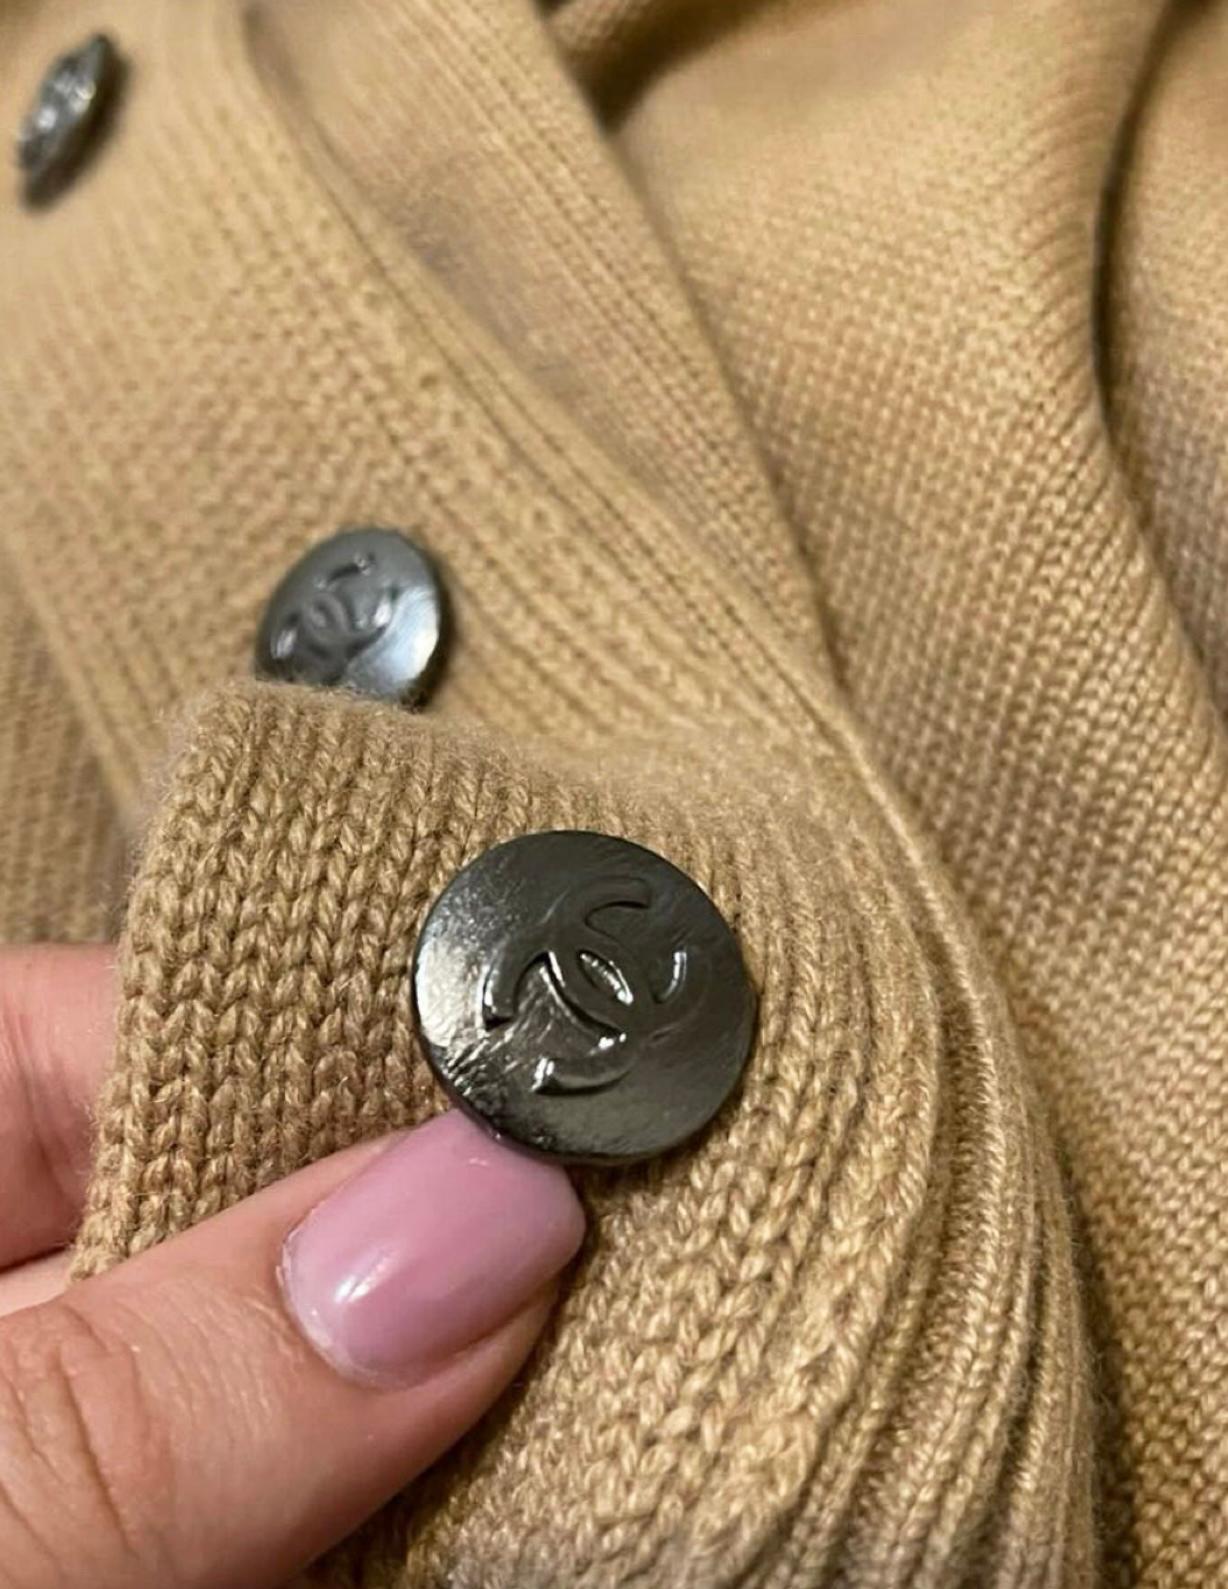 Chanel Claudia Schiffer Style Camel Cashmere Cardi Coat In Excellent Condition For Sale In Dubai, AE